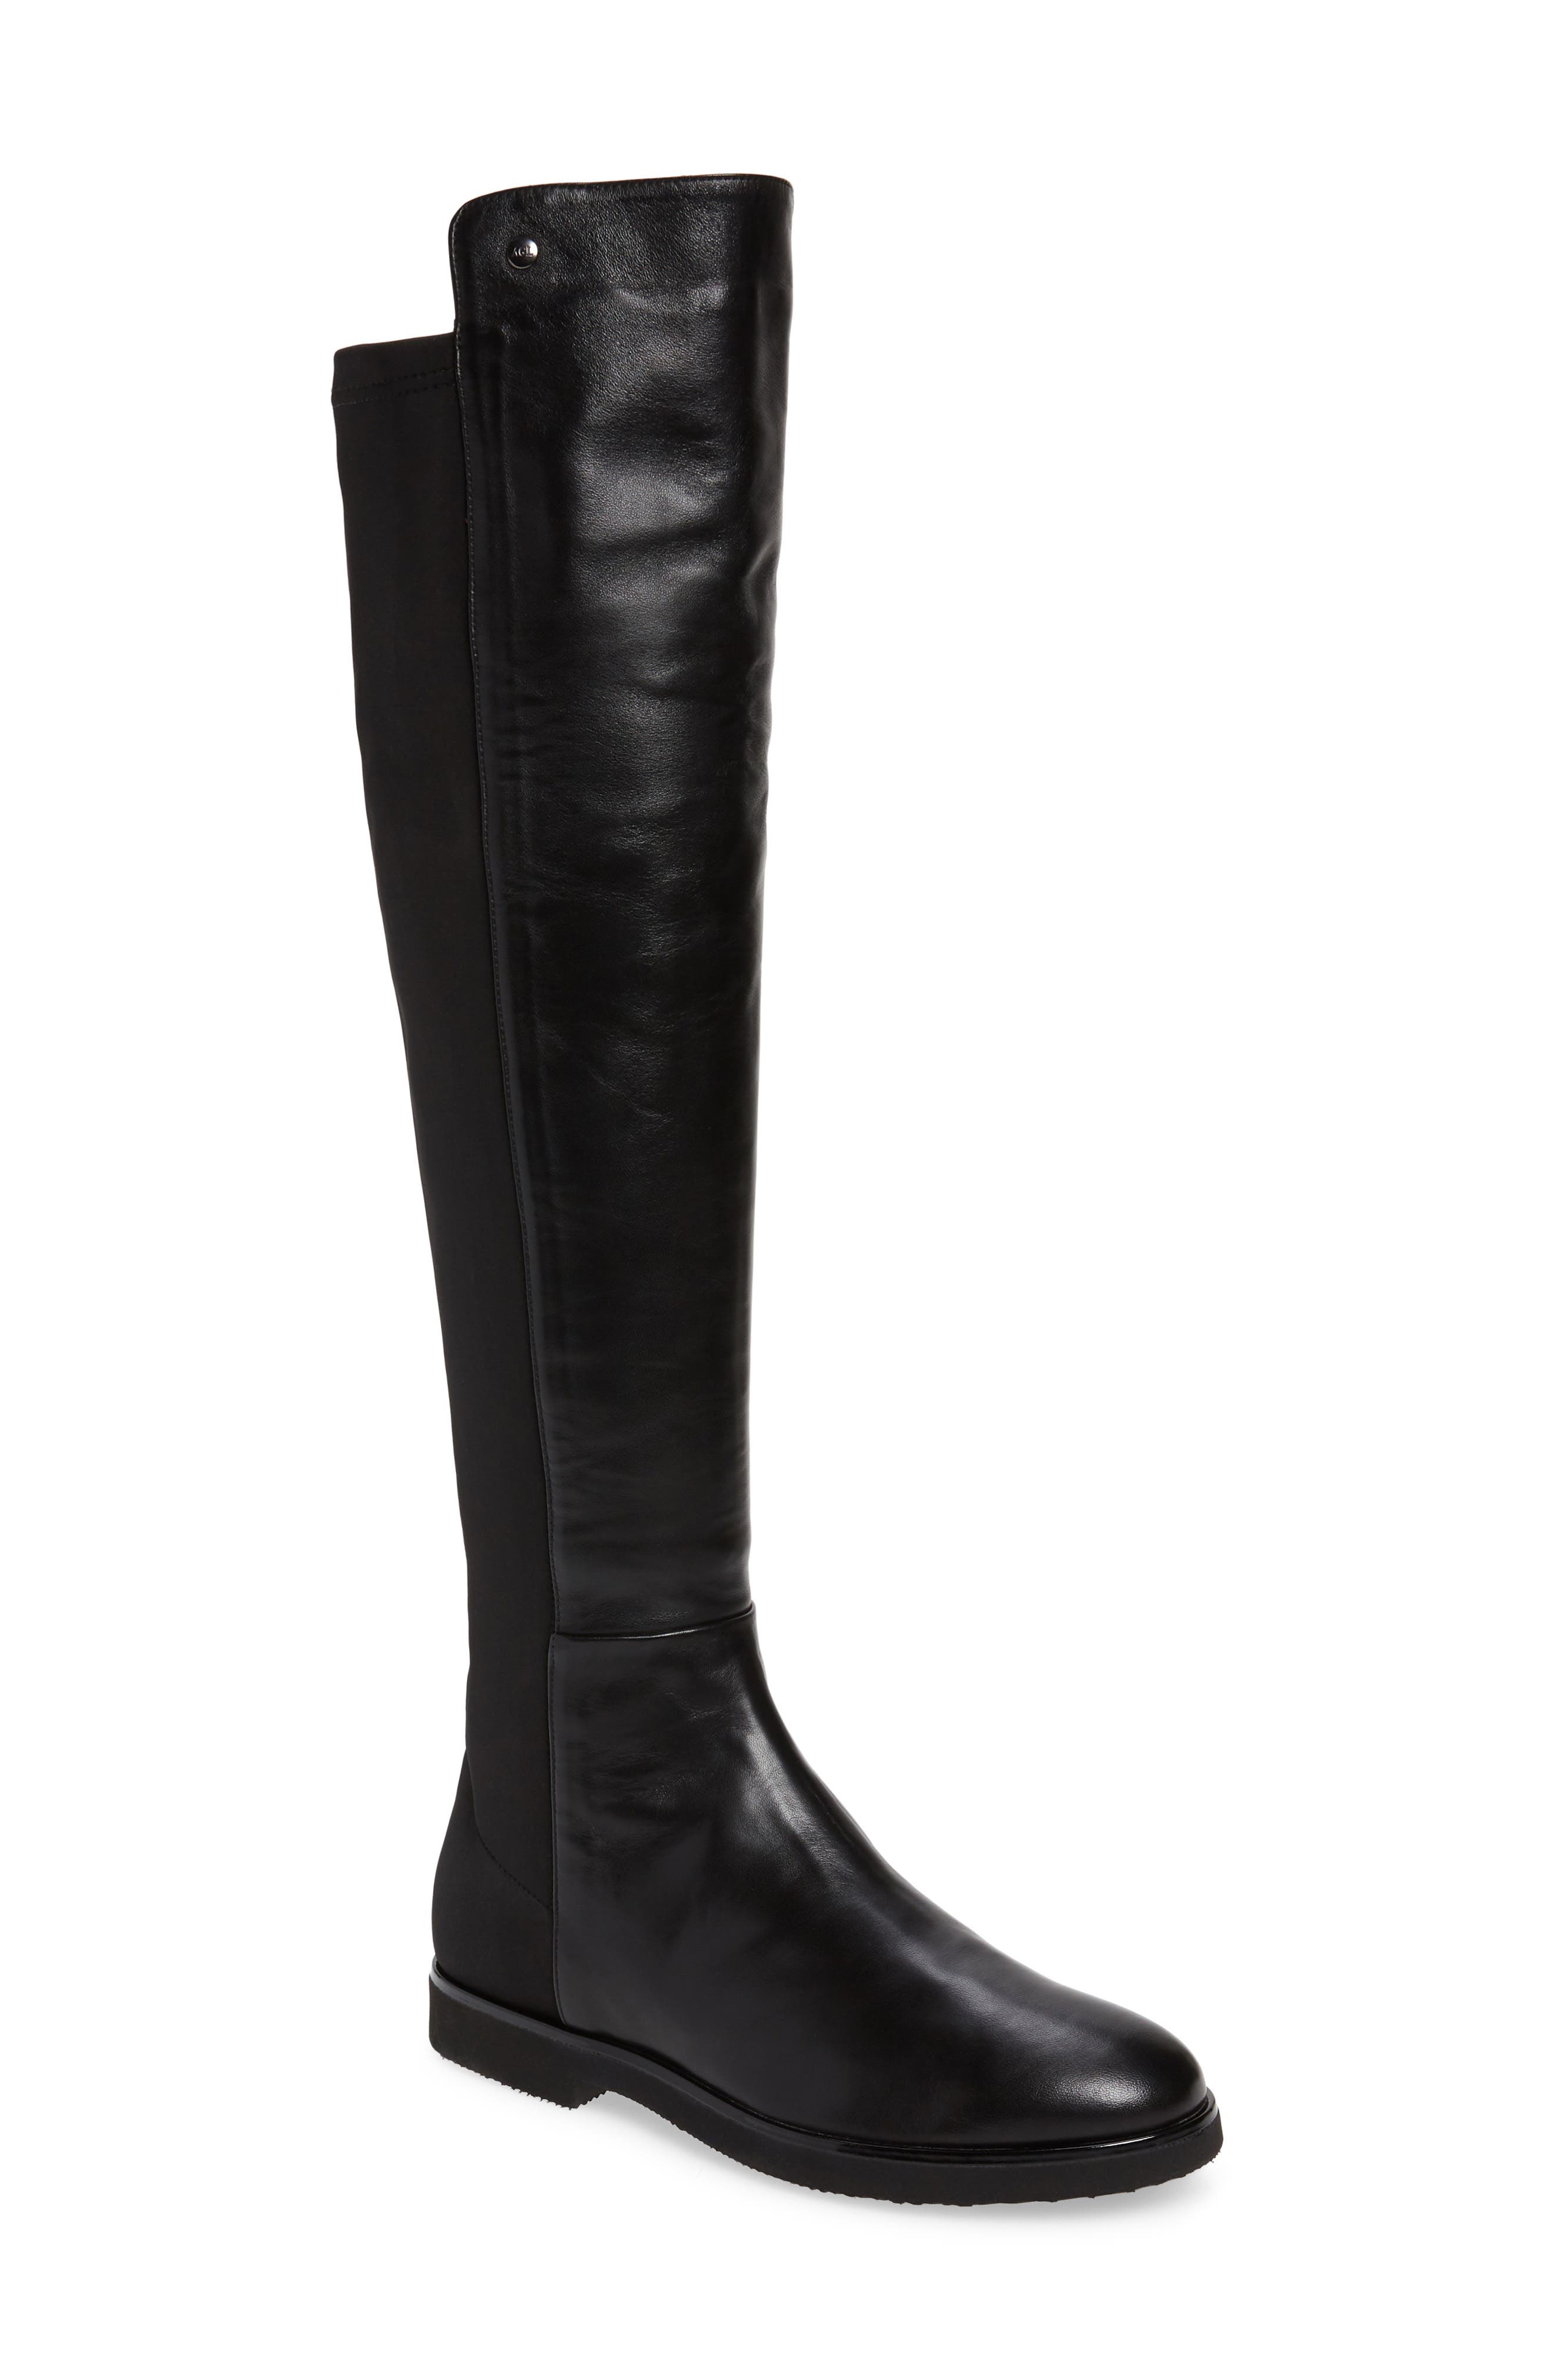 Women's AGL Boots | Nordstrom